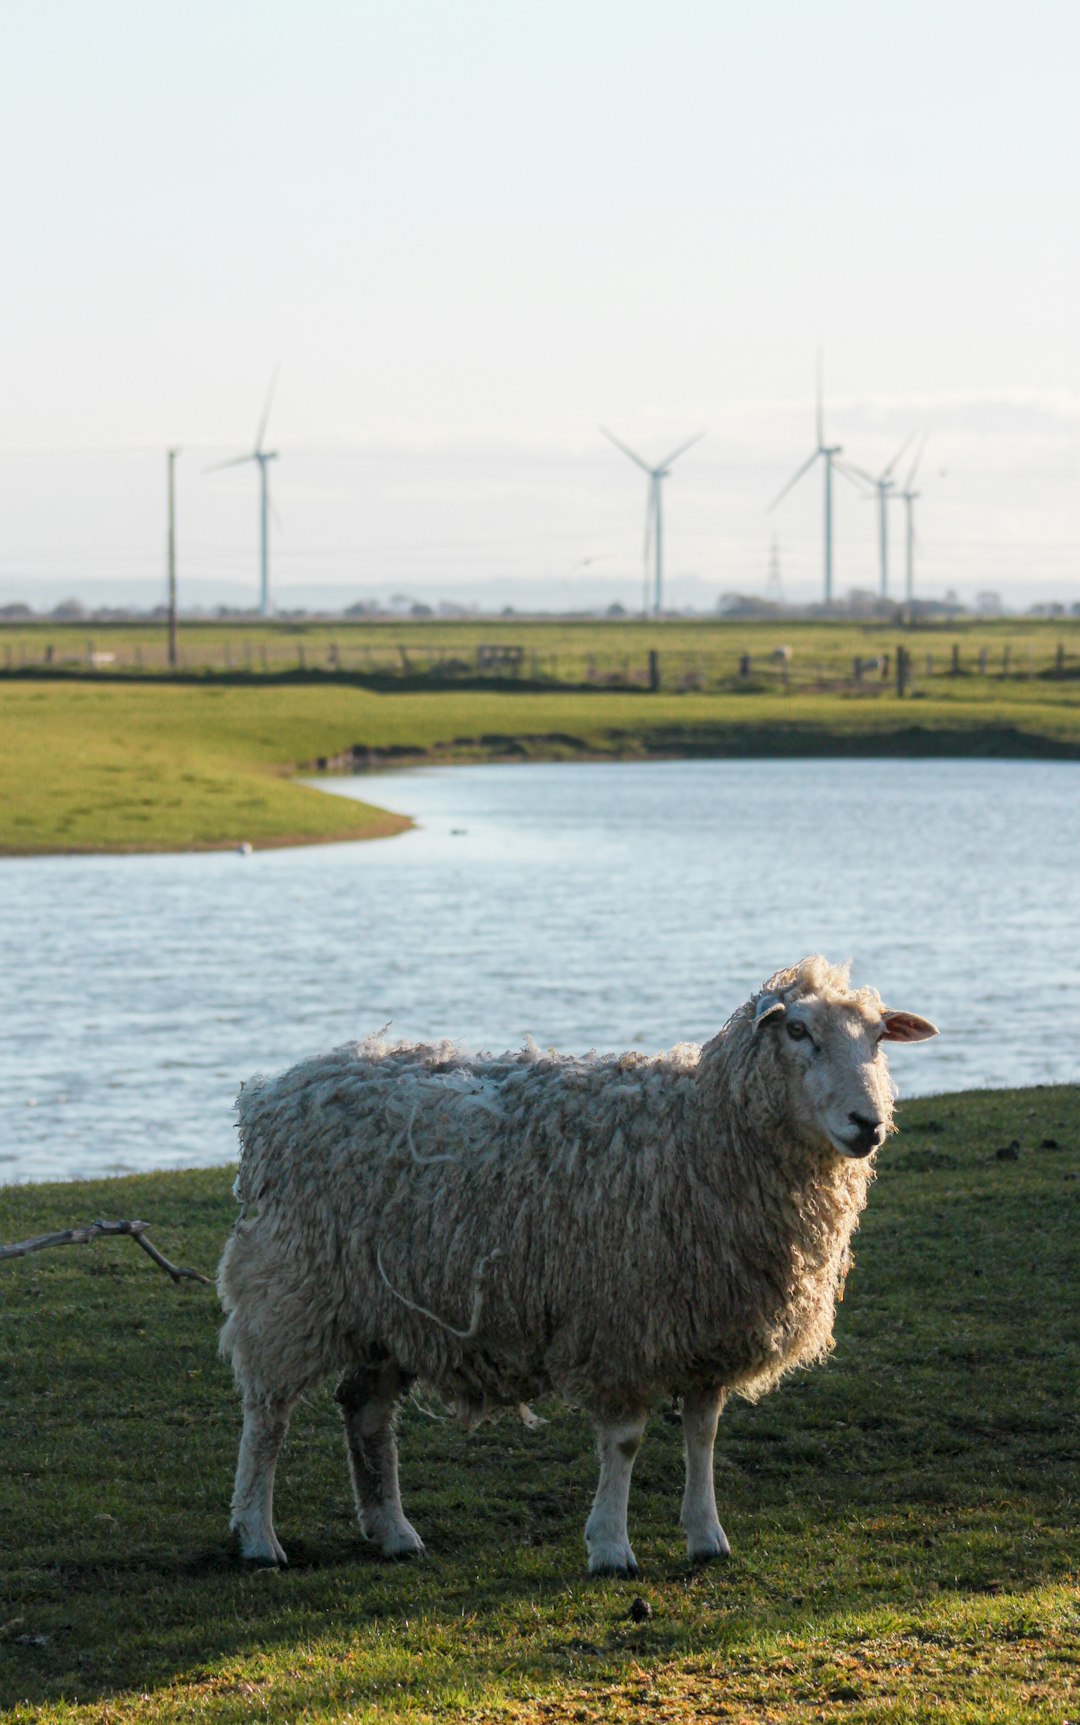 white sheep on green grass field near body of water during daytime